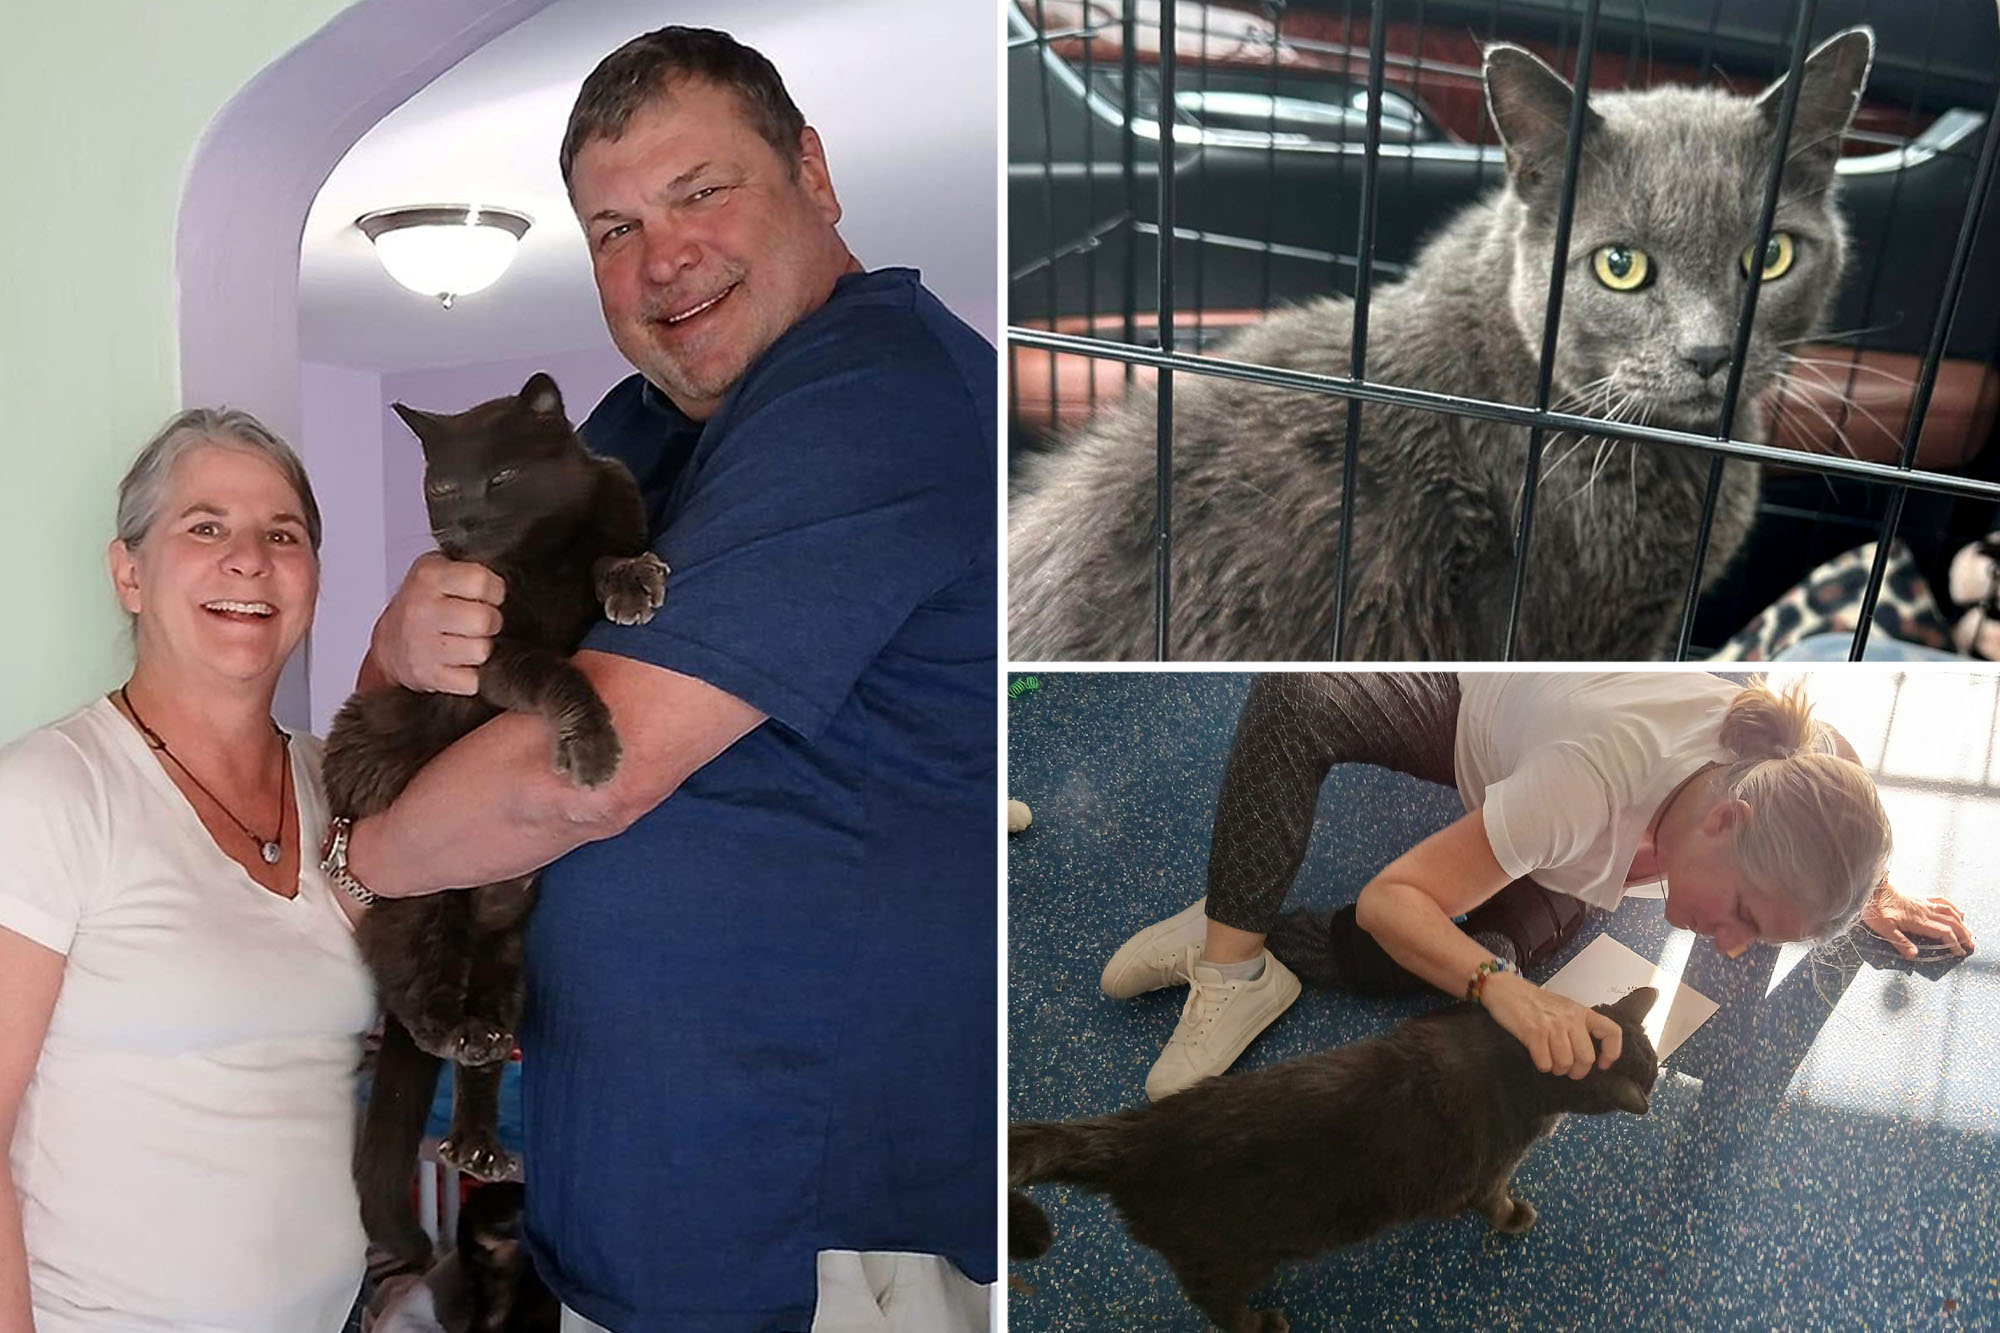 Cindy and Jeff Hall, oif Nevada, received their own "miracle" when they were reunited with their lost cat, Sam, who had found himself more than 1,200 miles away in Arkansas.